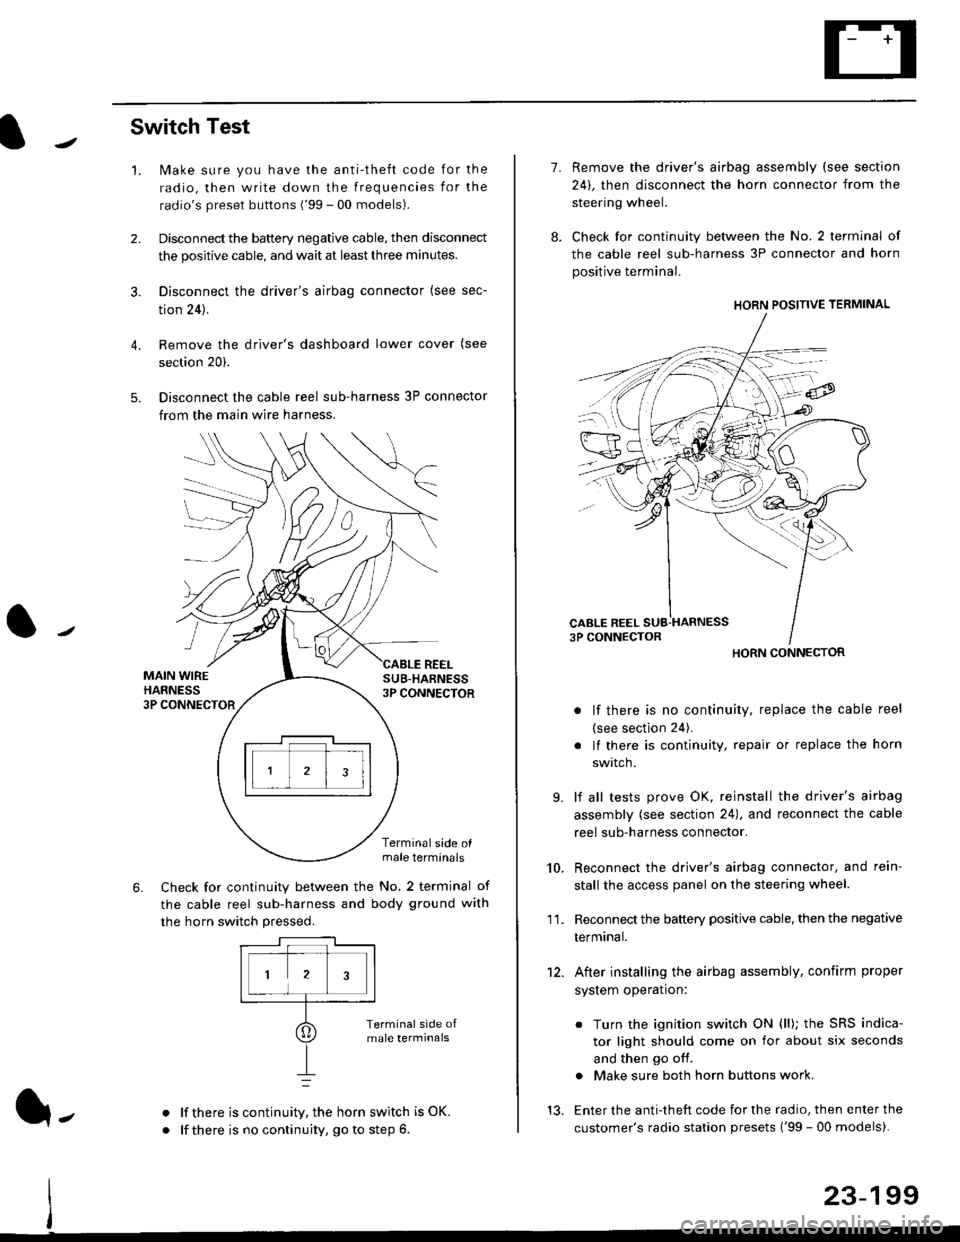 HONDA CIVIC 2000 6.G Owners Manual Switch Test
lMake sure you have the anti-theft code for the
radio, then write down the frequencies for the
radios preset buttons (99 - 00 models).
Disconnect the battery negative cable, then disconn